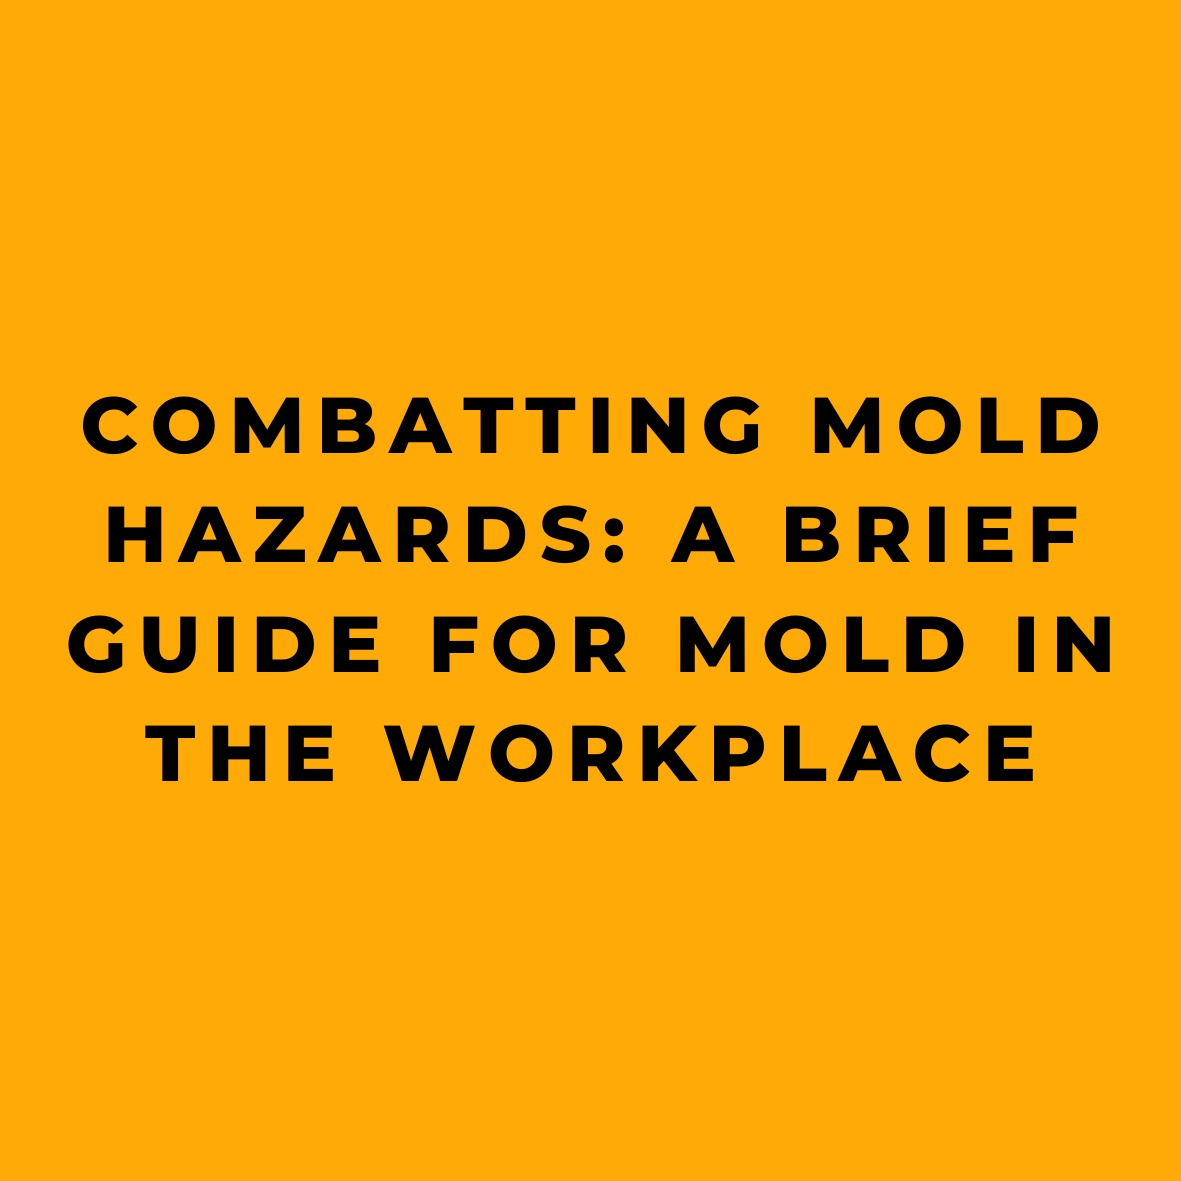 Combatting Mold Hazards A Brief Guide for Mold in the Workplace